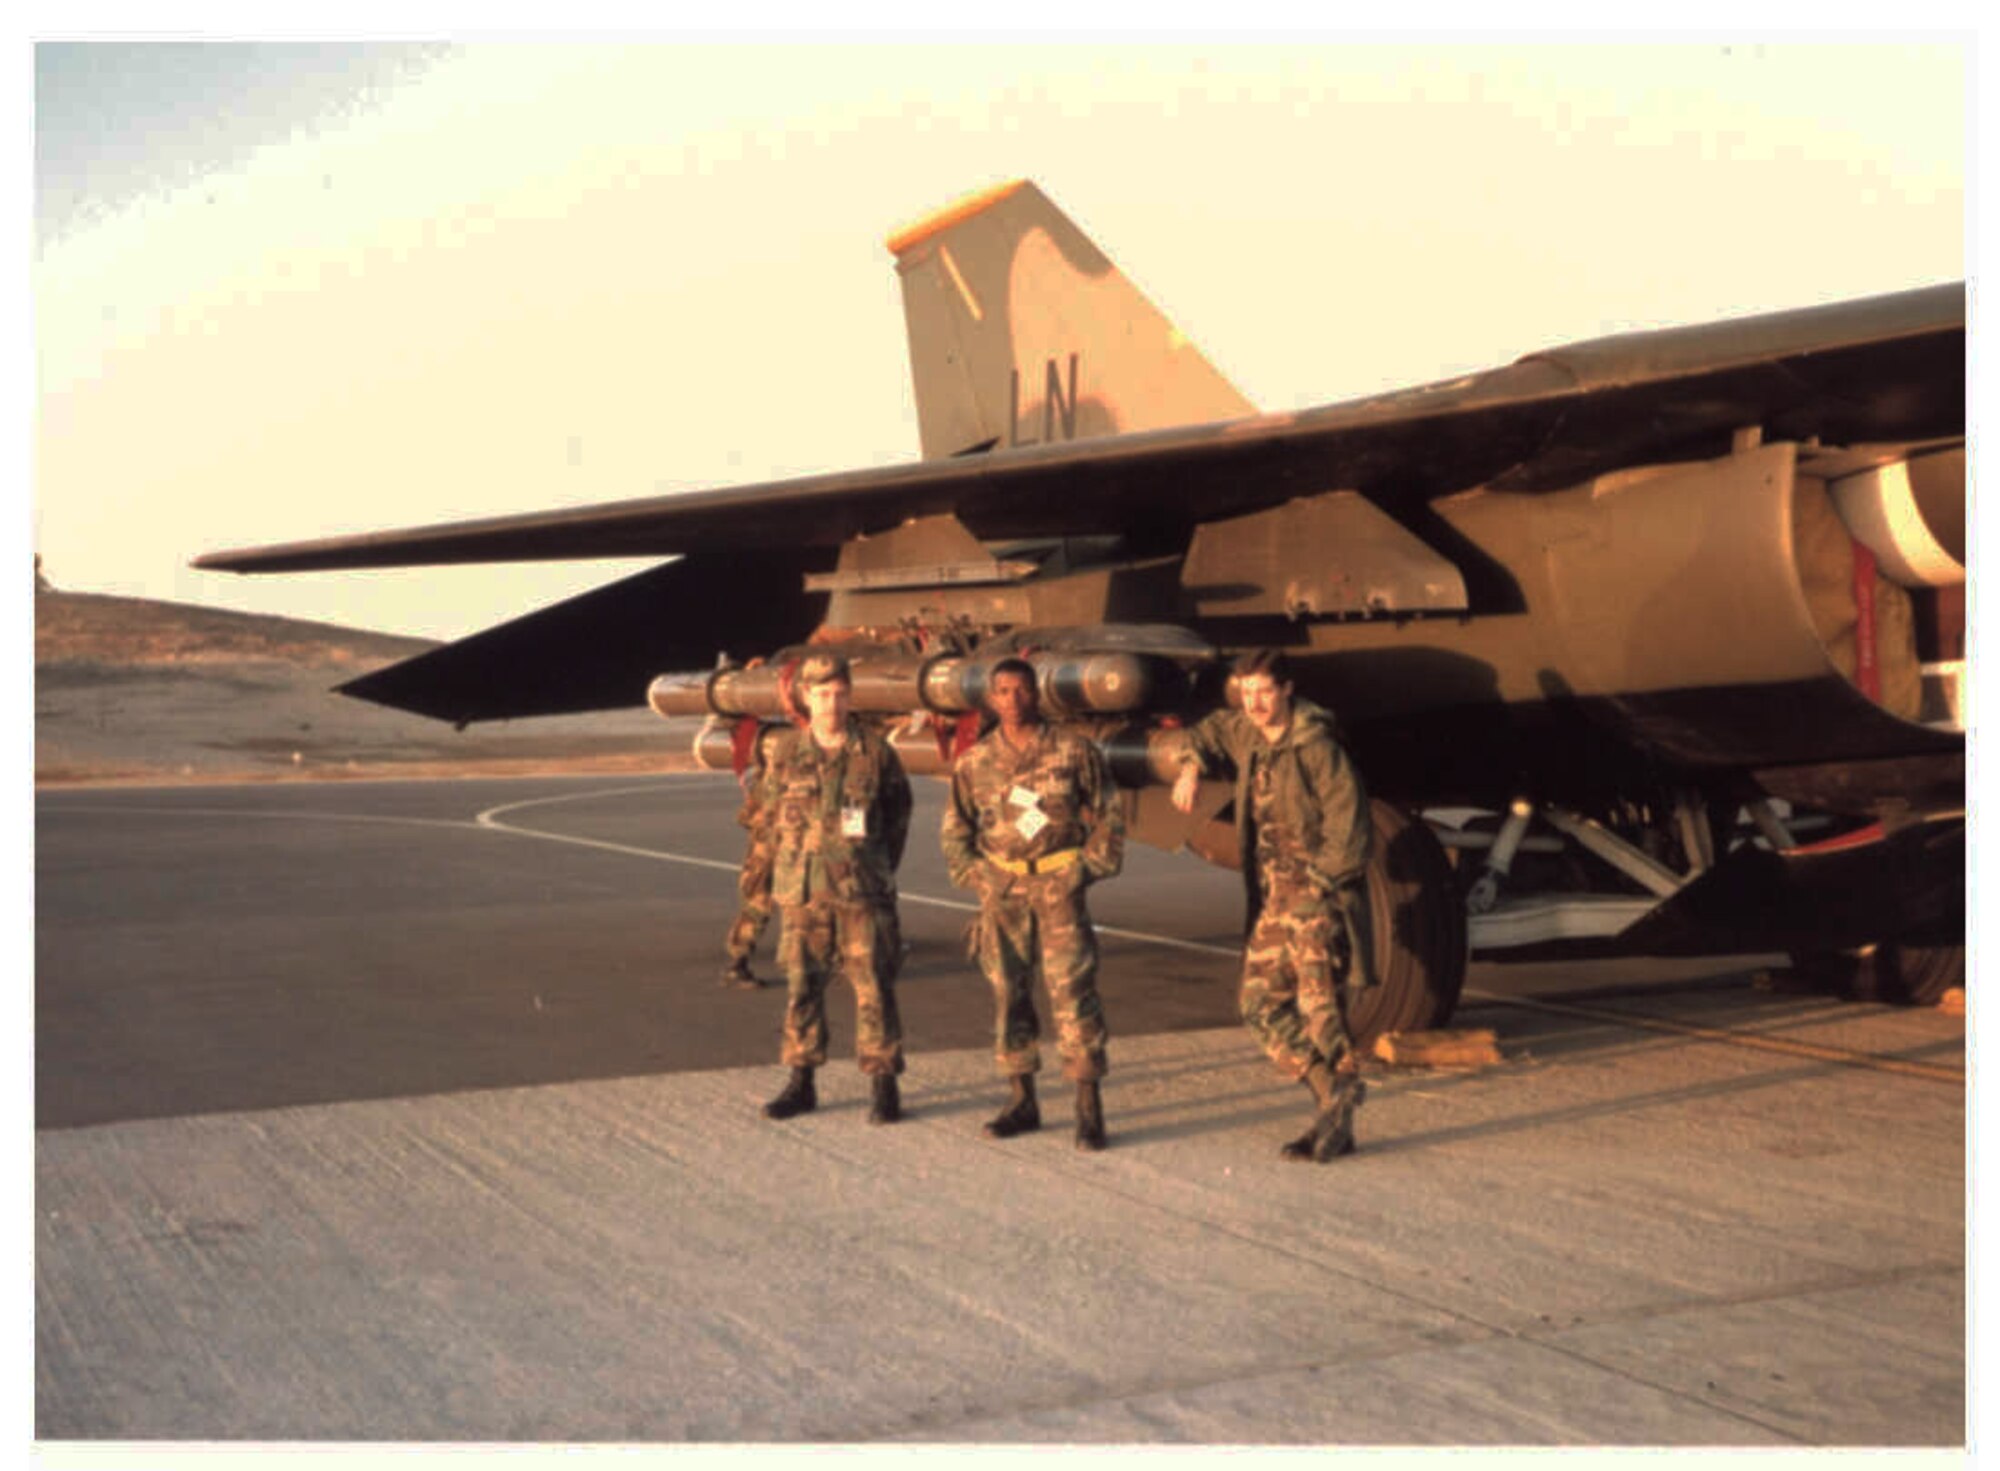 Chief Master Sgt. Terry Goines, 301st Fighter Wing command chief master sergeant, is pictured as an Airman 1st Class with fellow weapons load crew members Staff Sgt. Robert Arbogast (left) and Senior Airman Mark Reckers (right) during operations Desert Shield and Desert Storm in Southwest Asia. Goines served as a weapons load crewmember for the 48th Tactical Fighter Wing at Royal Air Force Lakenheath, United Kingdom, which was the first unit in the United States Air Forces in Europe to deploy in support of Operation Desert Shield. (U.S. Air Force photo courtesy of Chief Master Sgt. Terry Goines)